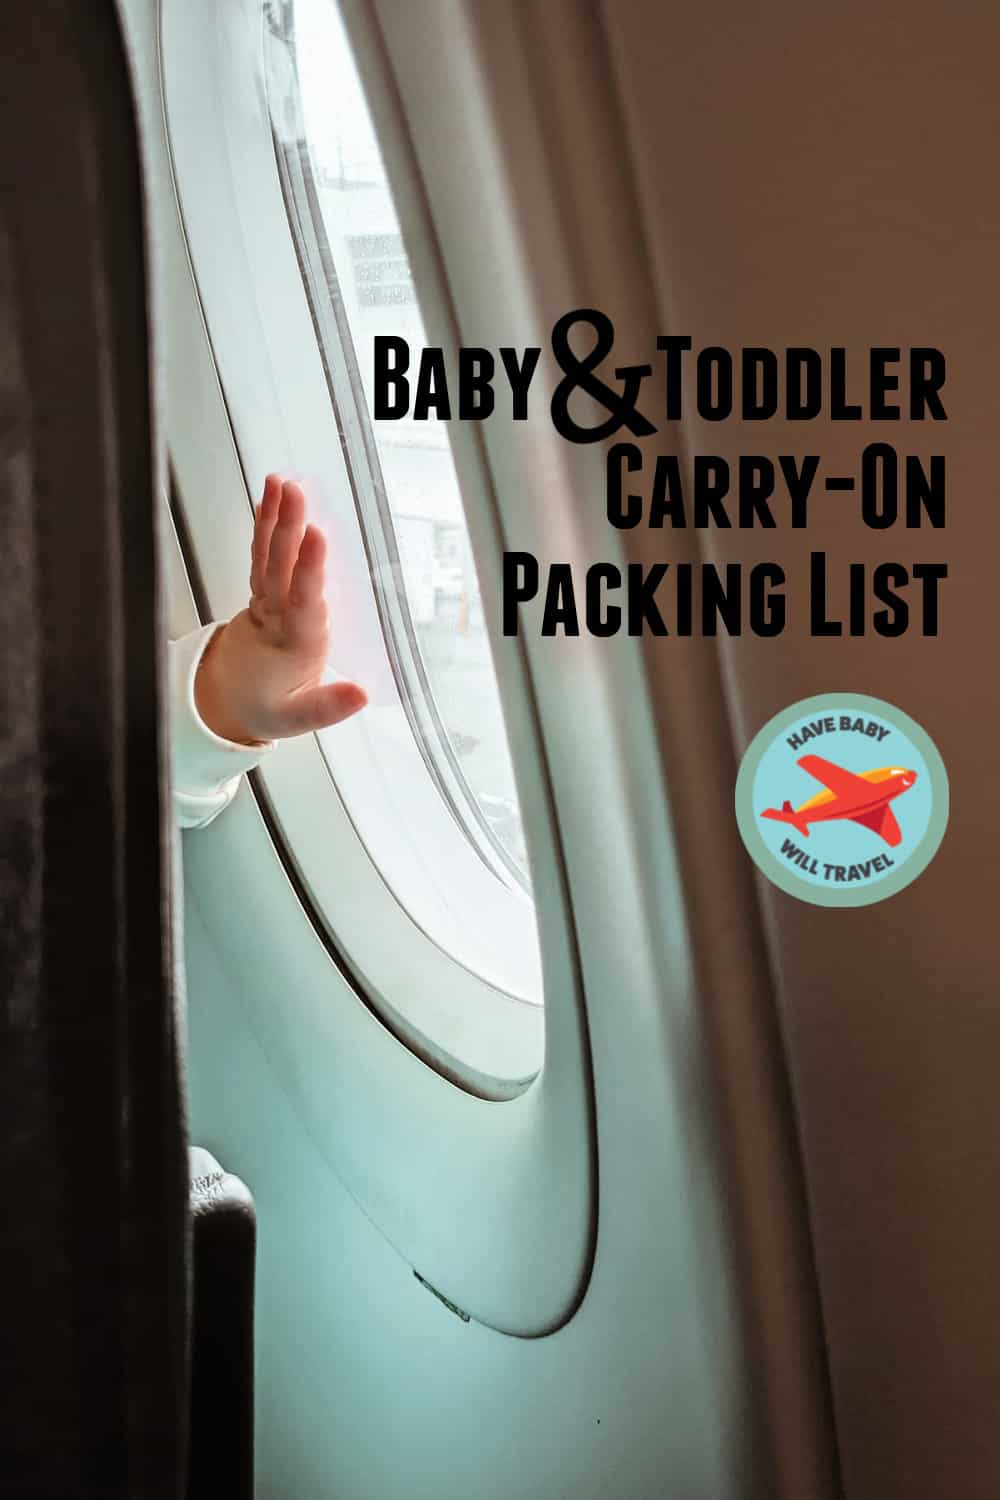 TRAVELING WITH A BABY: MY 5 ESSENTIAL ITEMS FOR THE FLIGHT